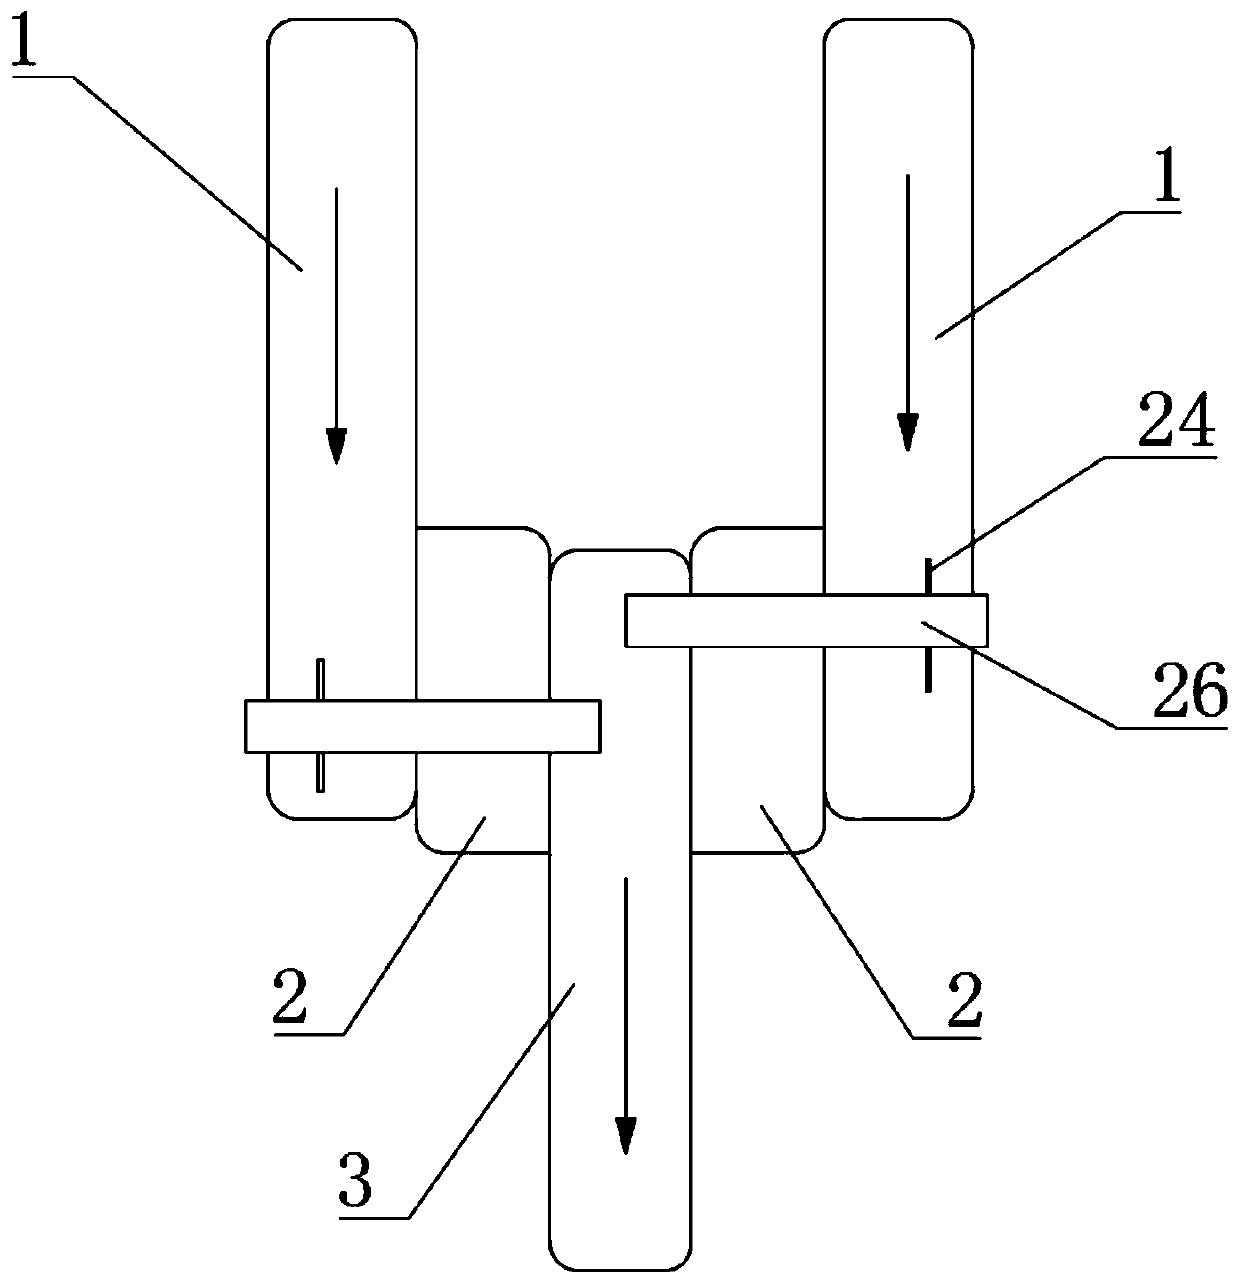 Follow-up combining and conveying device for strip packages